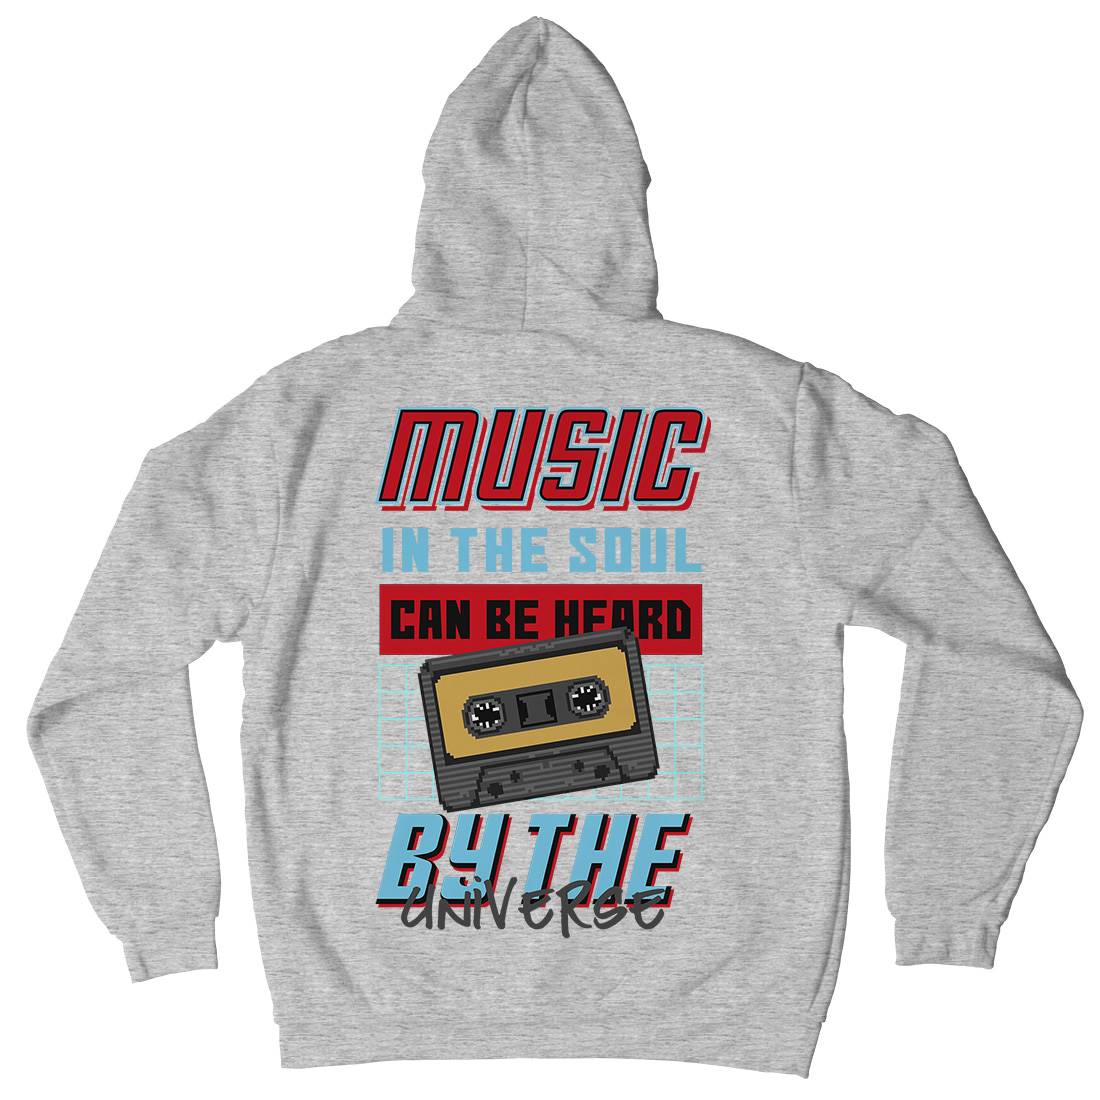 In The Soul Can Be Heard By The Universe Mens Hoodie With Pocket Music B935